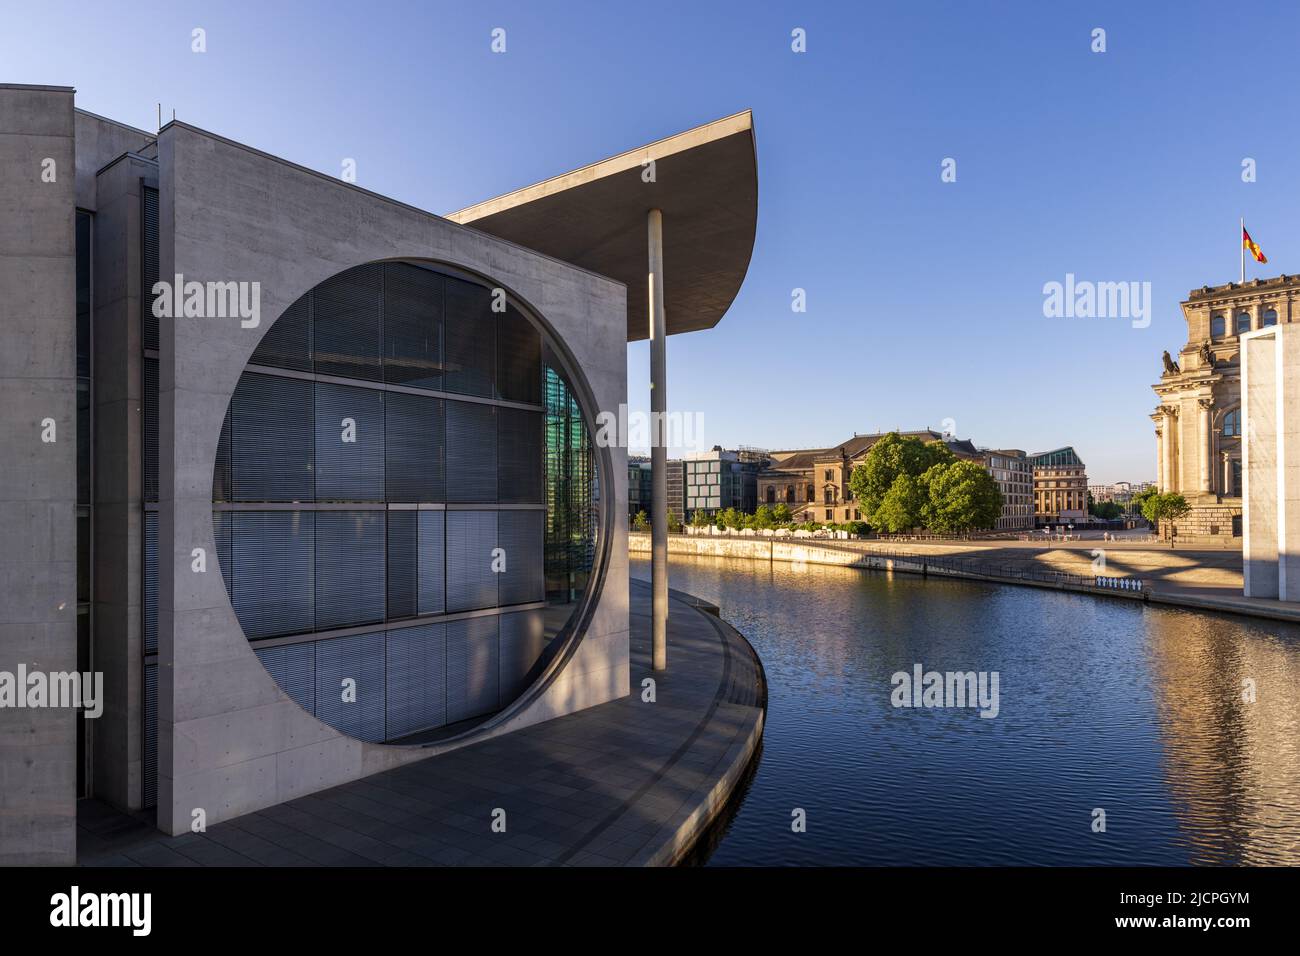 The striking architecture of the Marie Elisabeth Lüders Haus Building by the River Spree, Berlin. Stock Photo